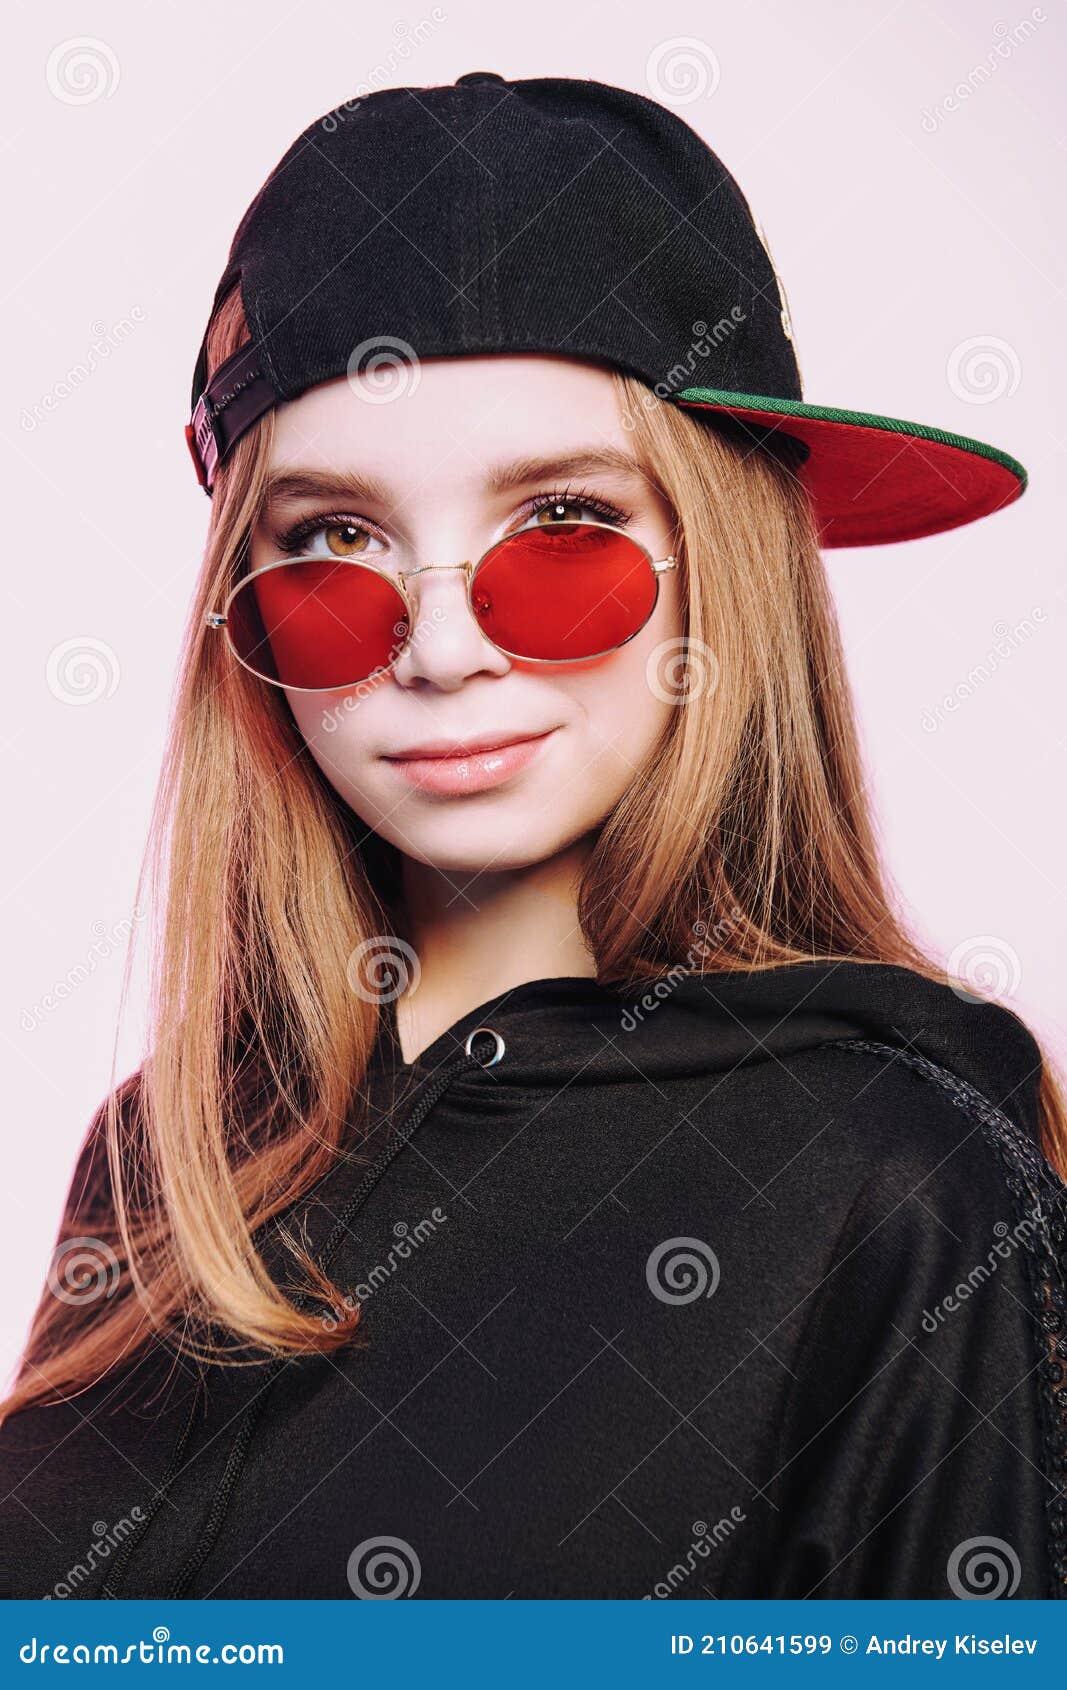 Pretty girl teenager stock image. Image of adolescent - 210641599